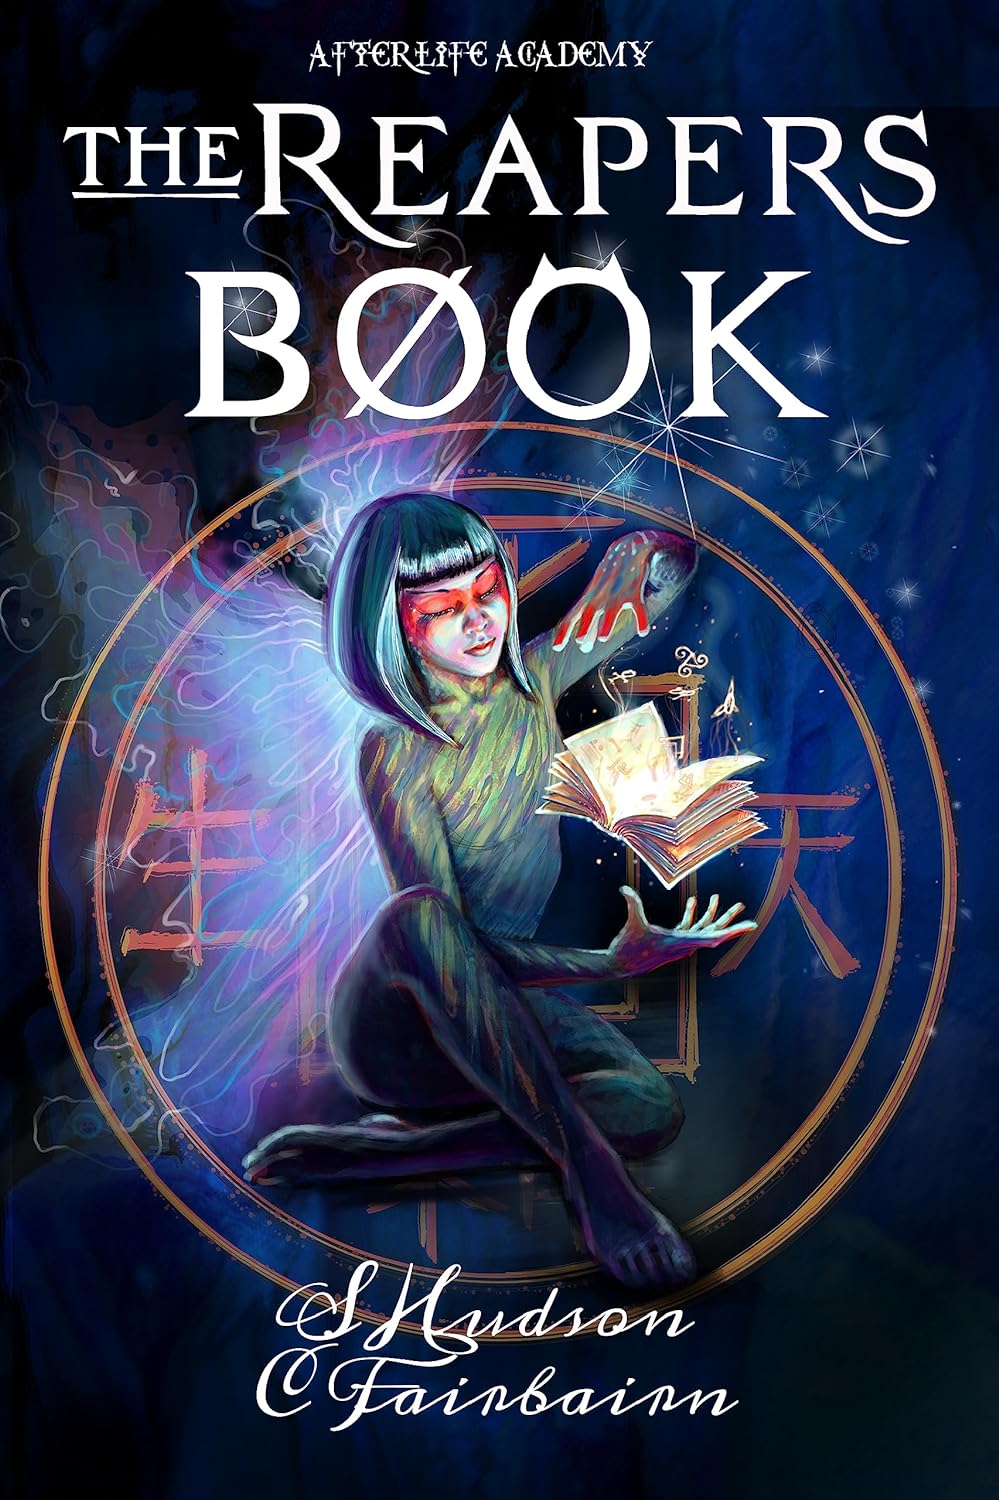 The Reaper’s Book (Afterlife Academy Book 3) by…